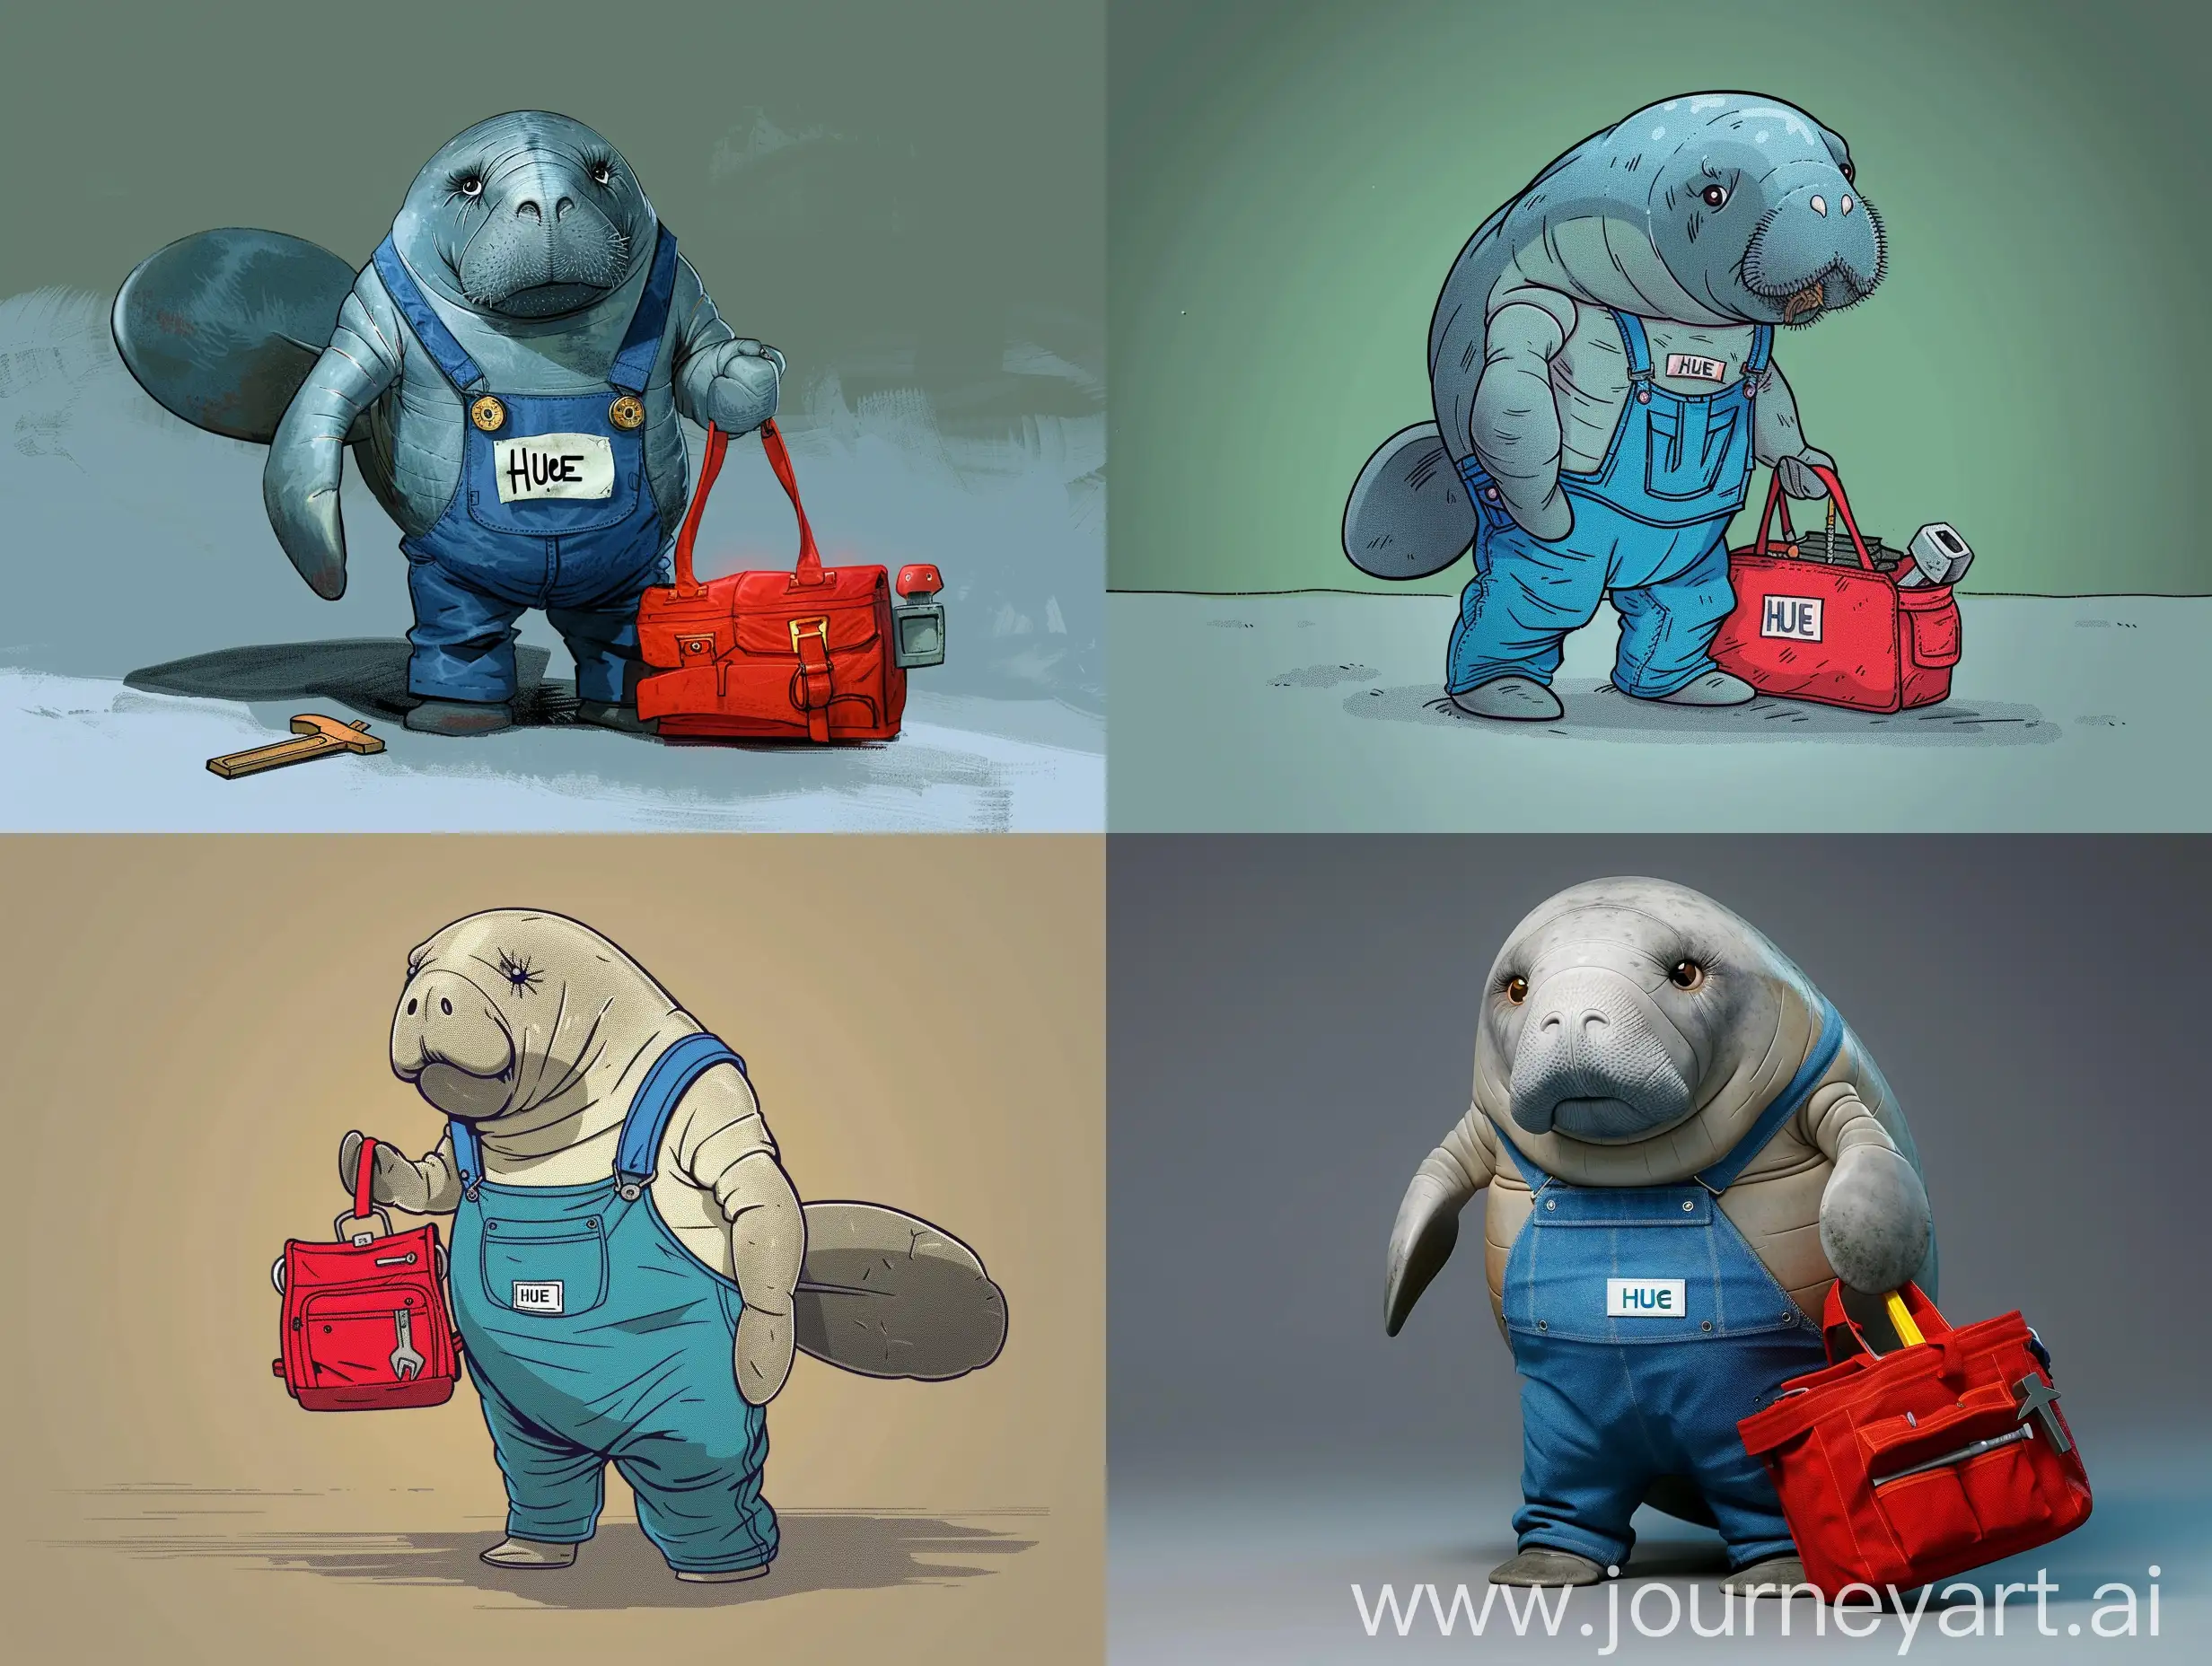 Cheerful-Manatees-in-Blue-Overalls-Carrying-Tools-Vibrant-Cartoon-Scene